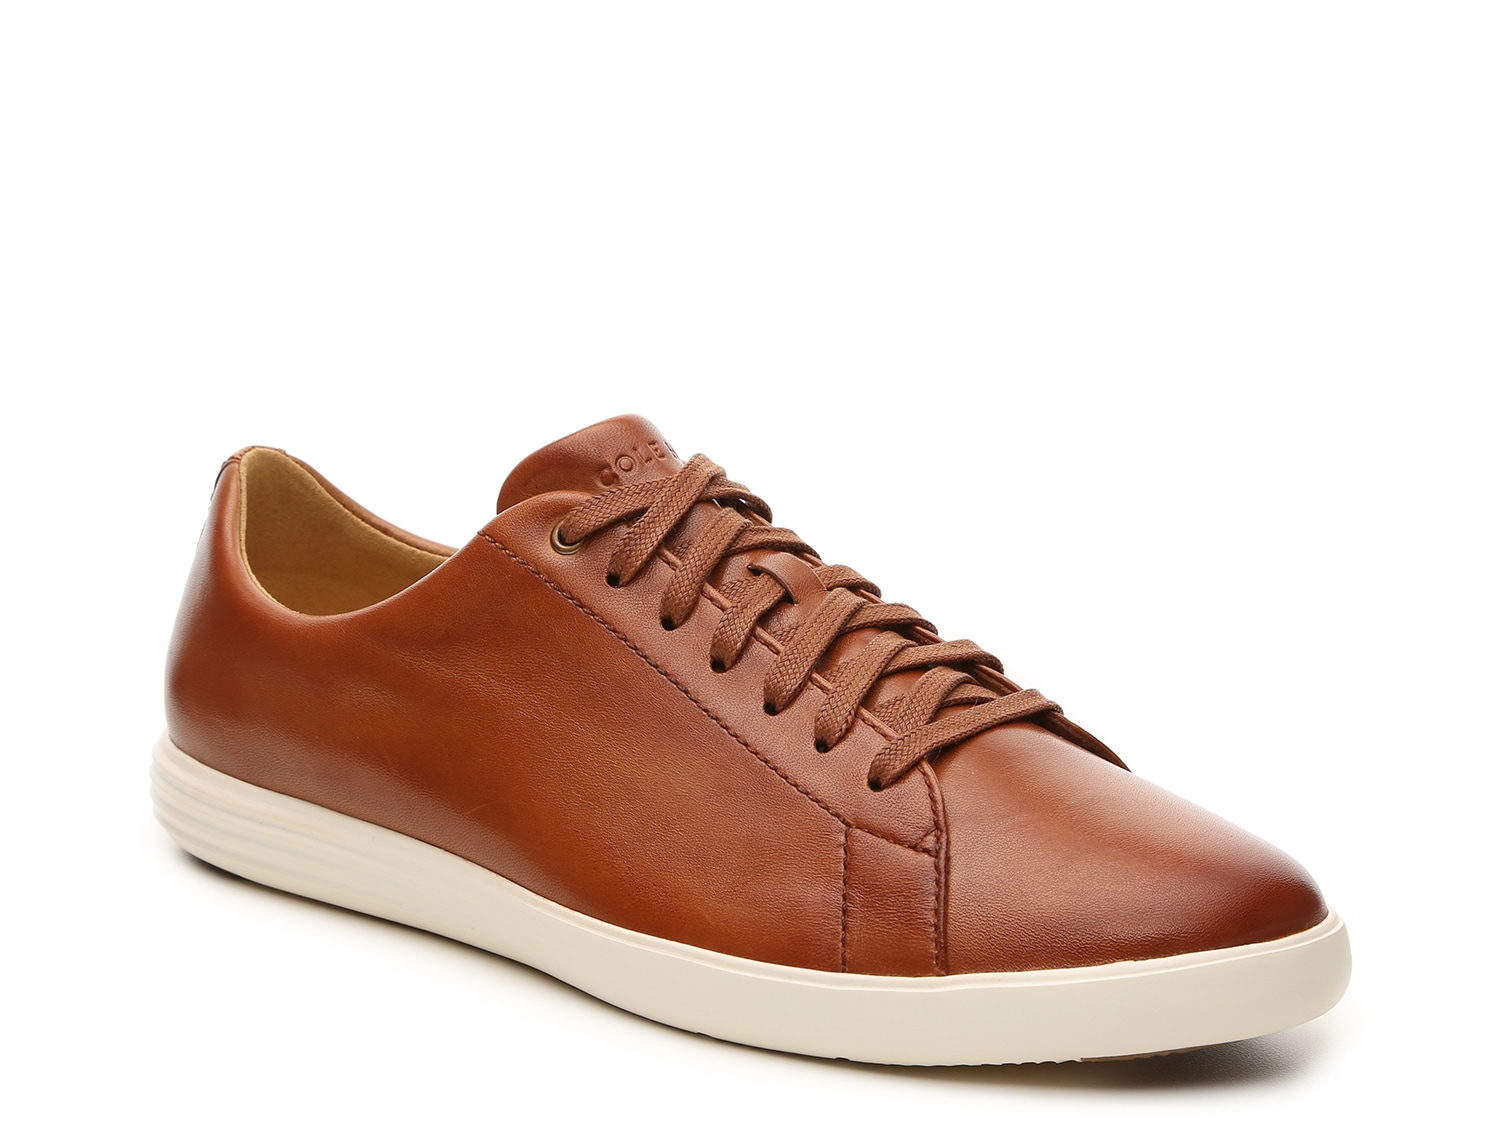 dressy casual shoes mens